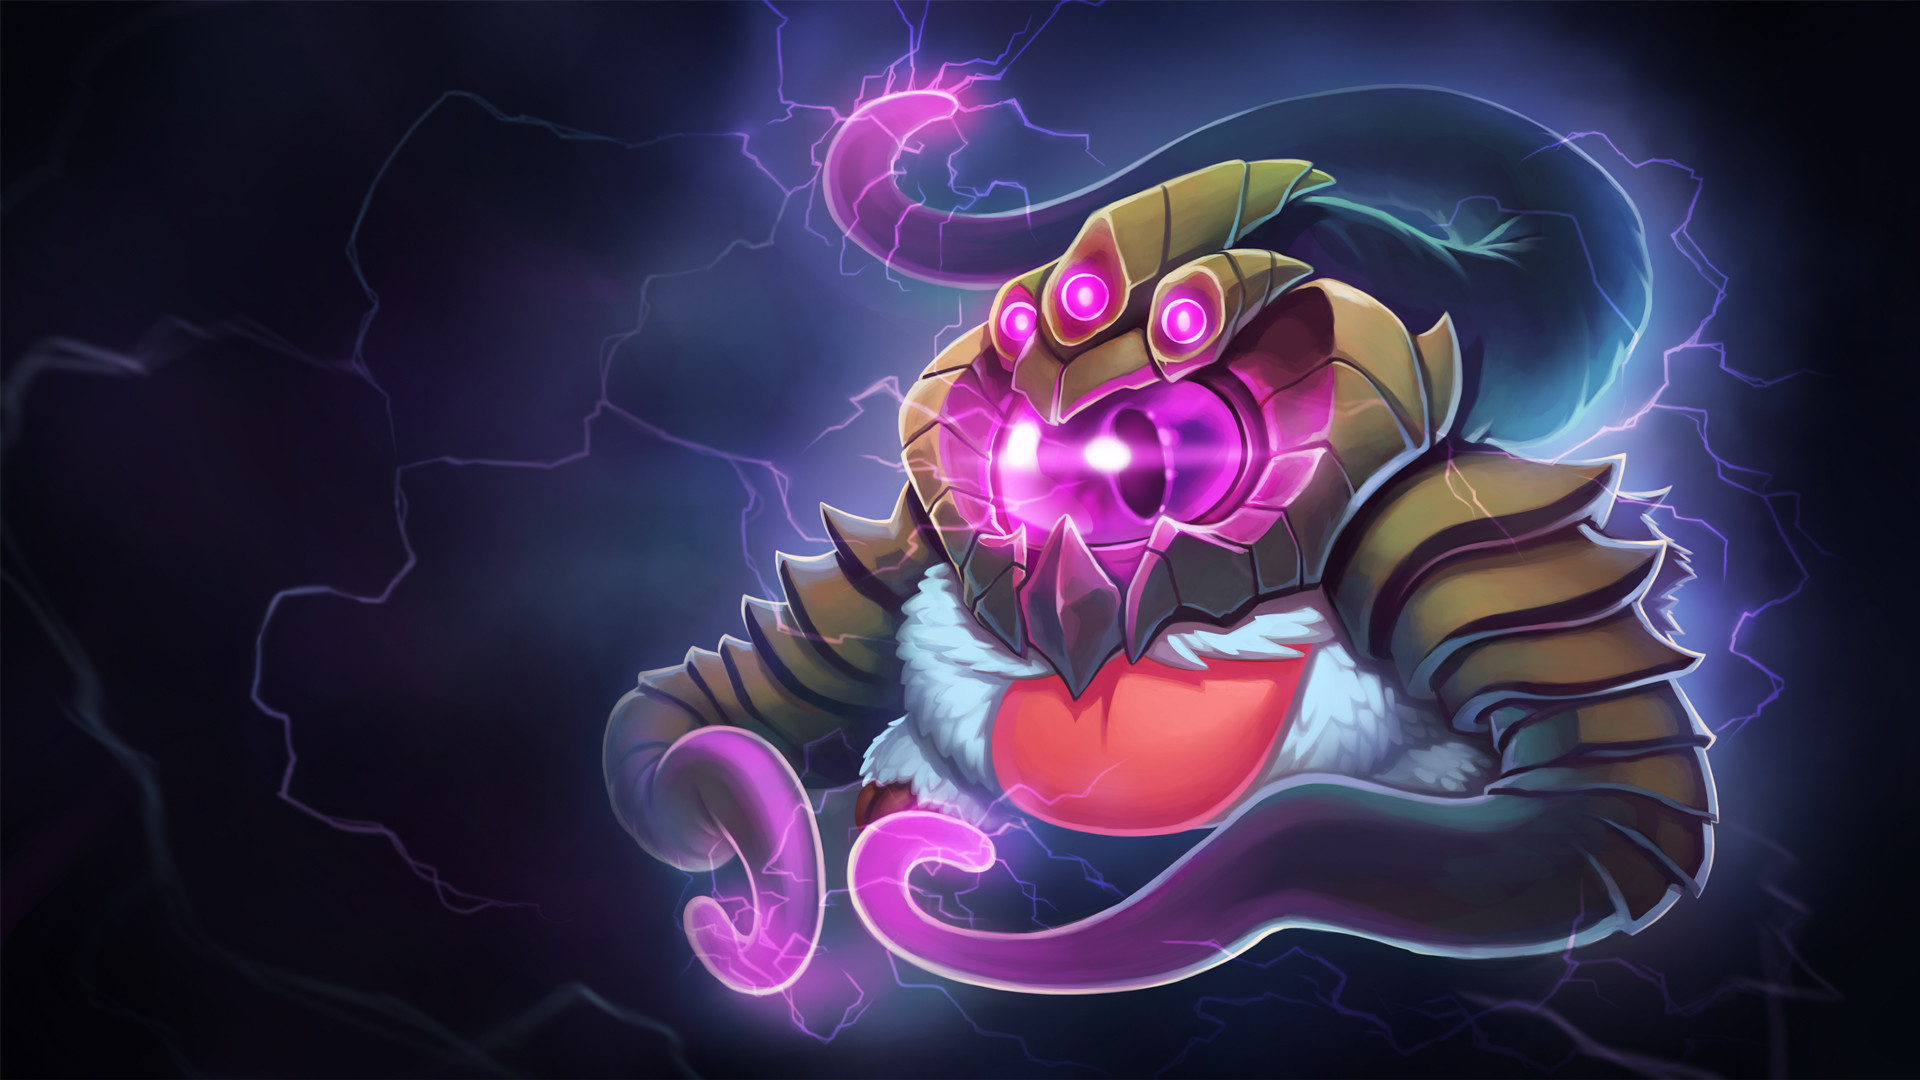 1920x1080 League of Legends images Poro Vel'Koz HD wallpaper and background photos